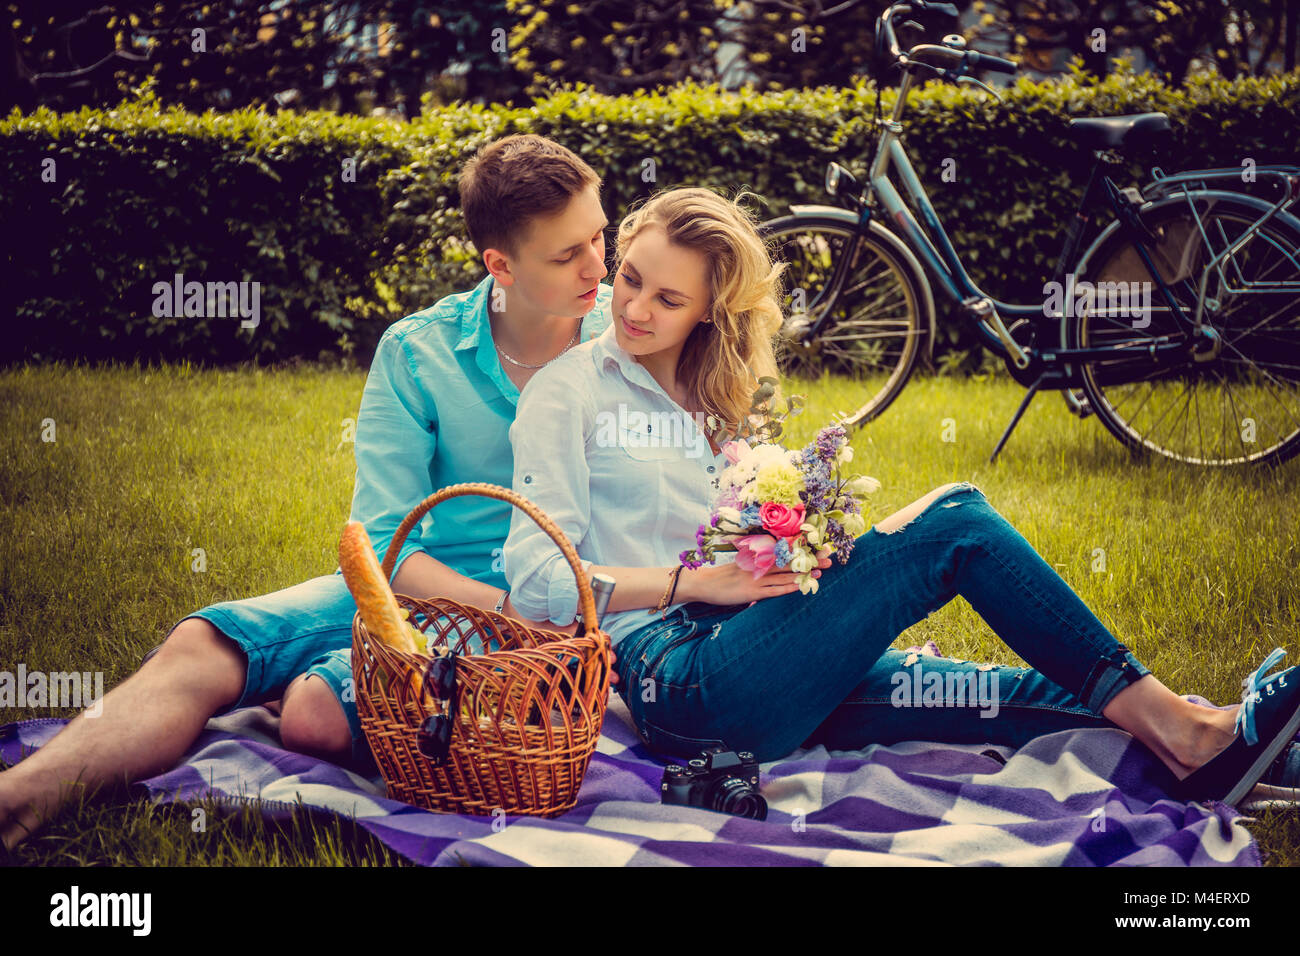 Lovely couple on picnik in a park in summer sunny day. Stock Photo